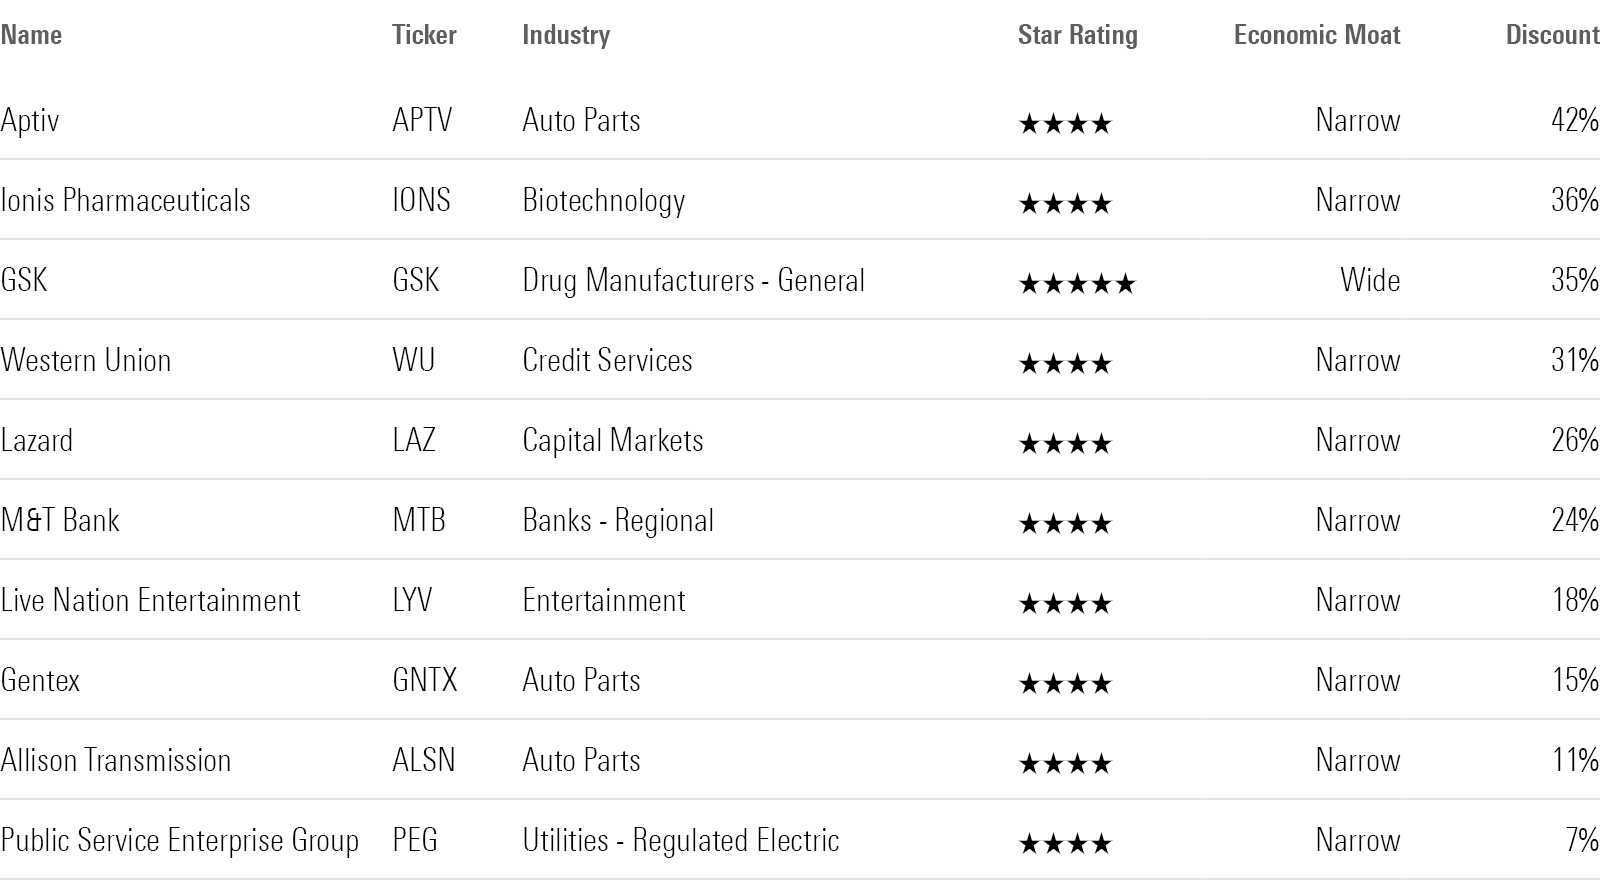 Table showing undervalued stocks with economic moat that beat their earnings estimates by the most.